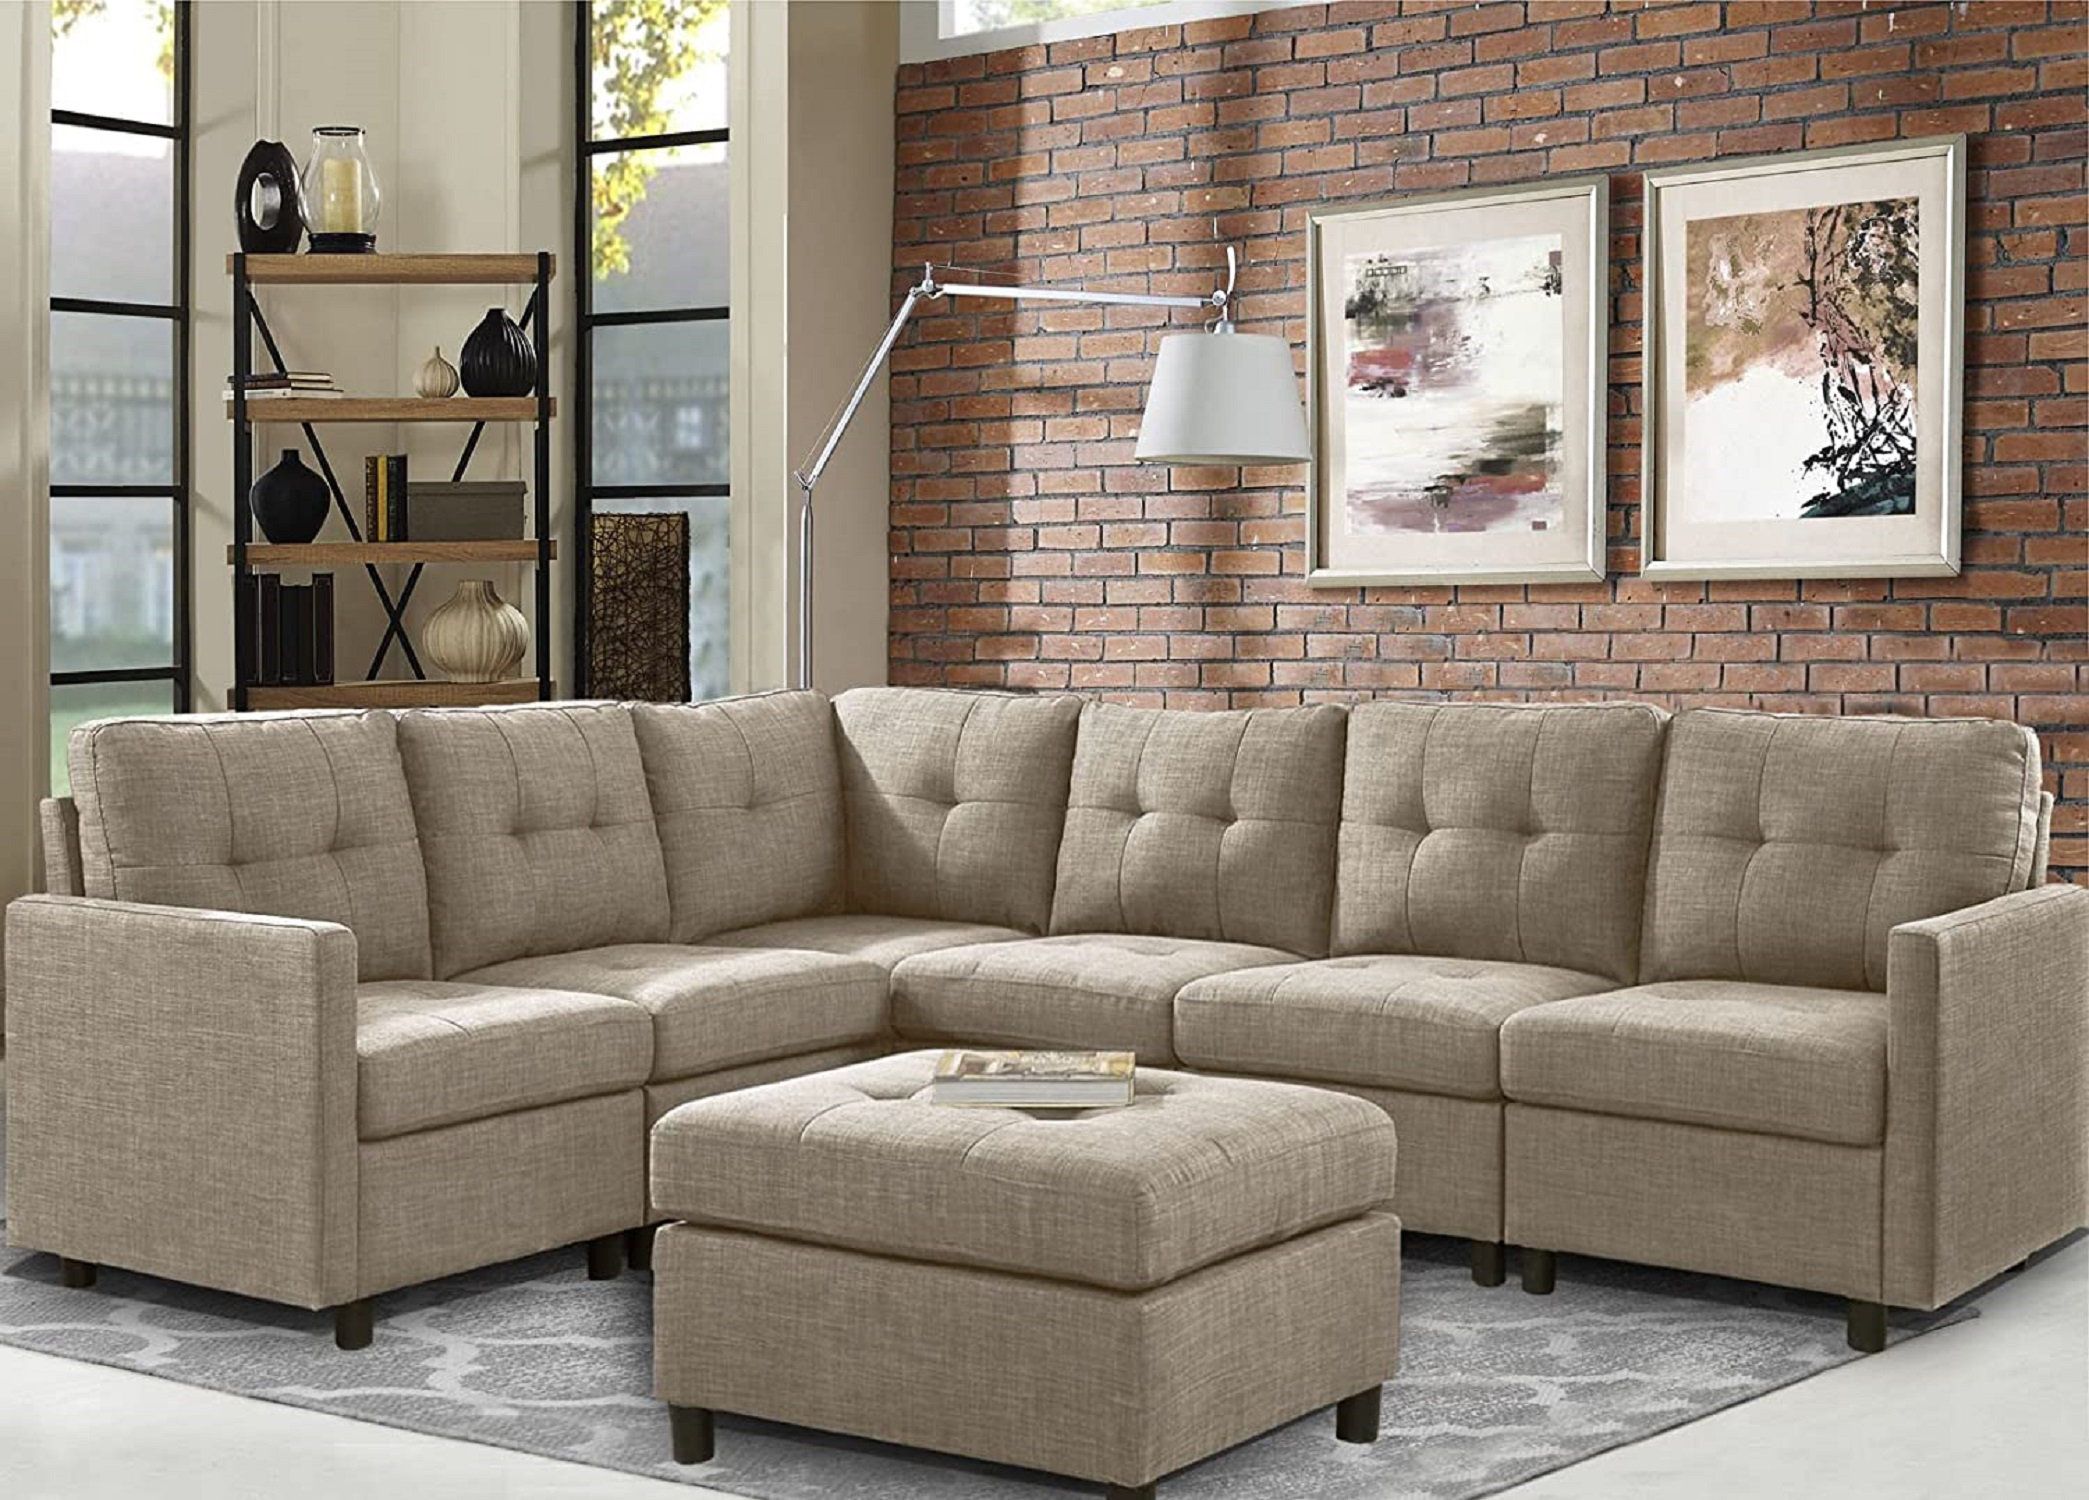 Latitude Run® Modular Sofa & Chaise With Ottoman | Wayfair Intended For Sectional Sofas With Ottomans And Tufted Back Cushion (View 6 of 20)